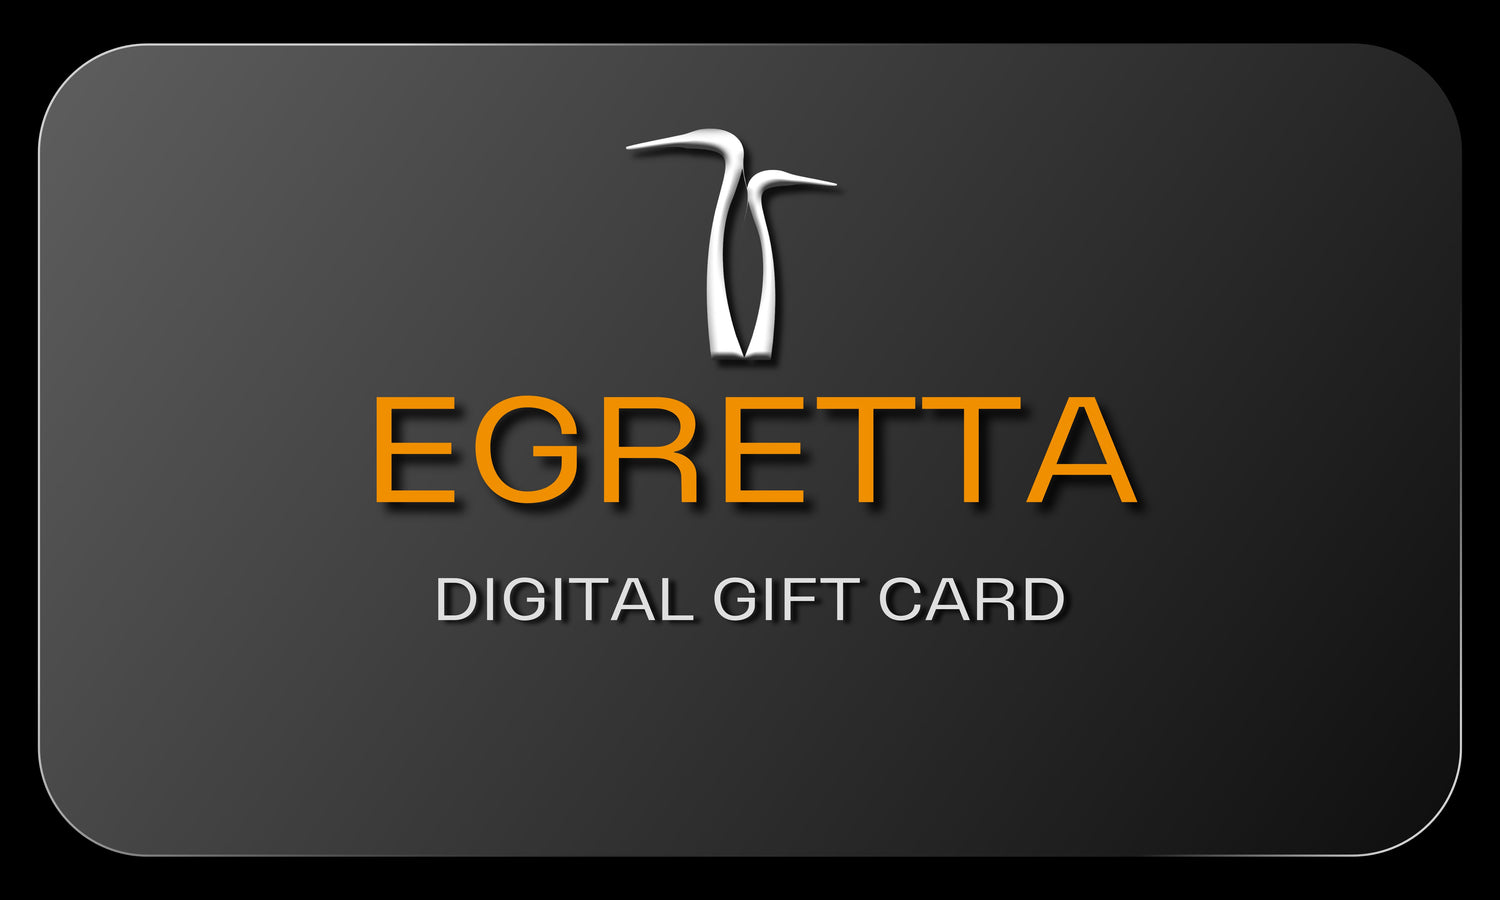 Egretta gift card for any special occasion.